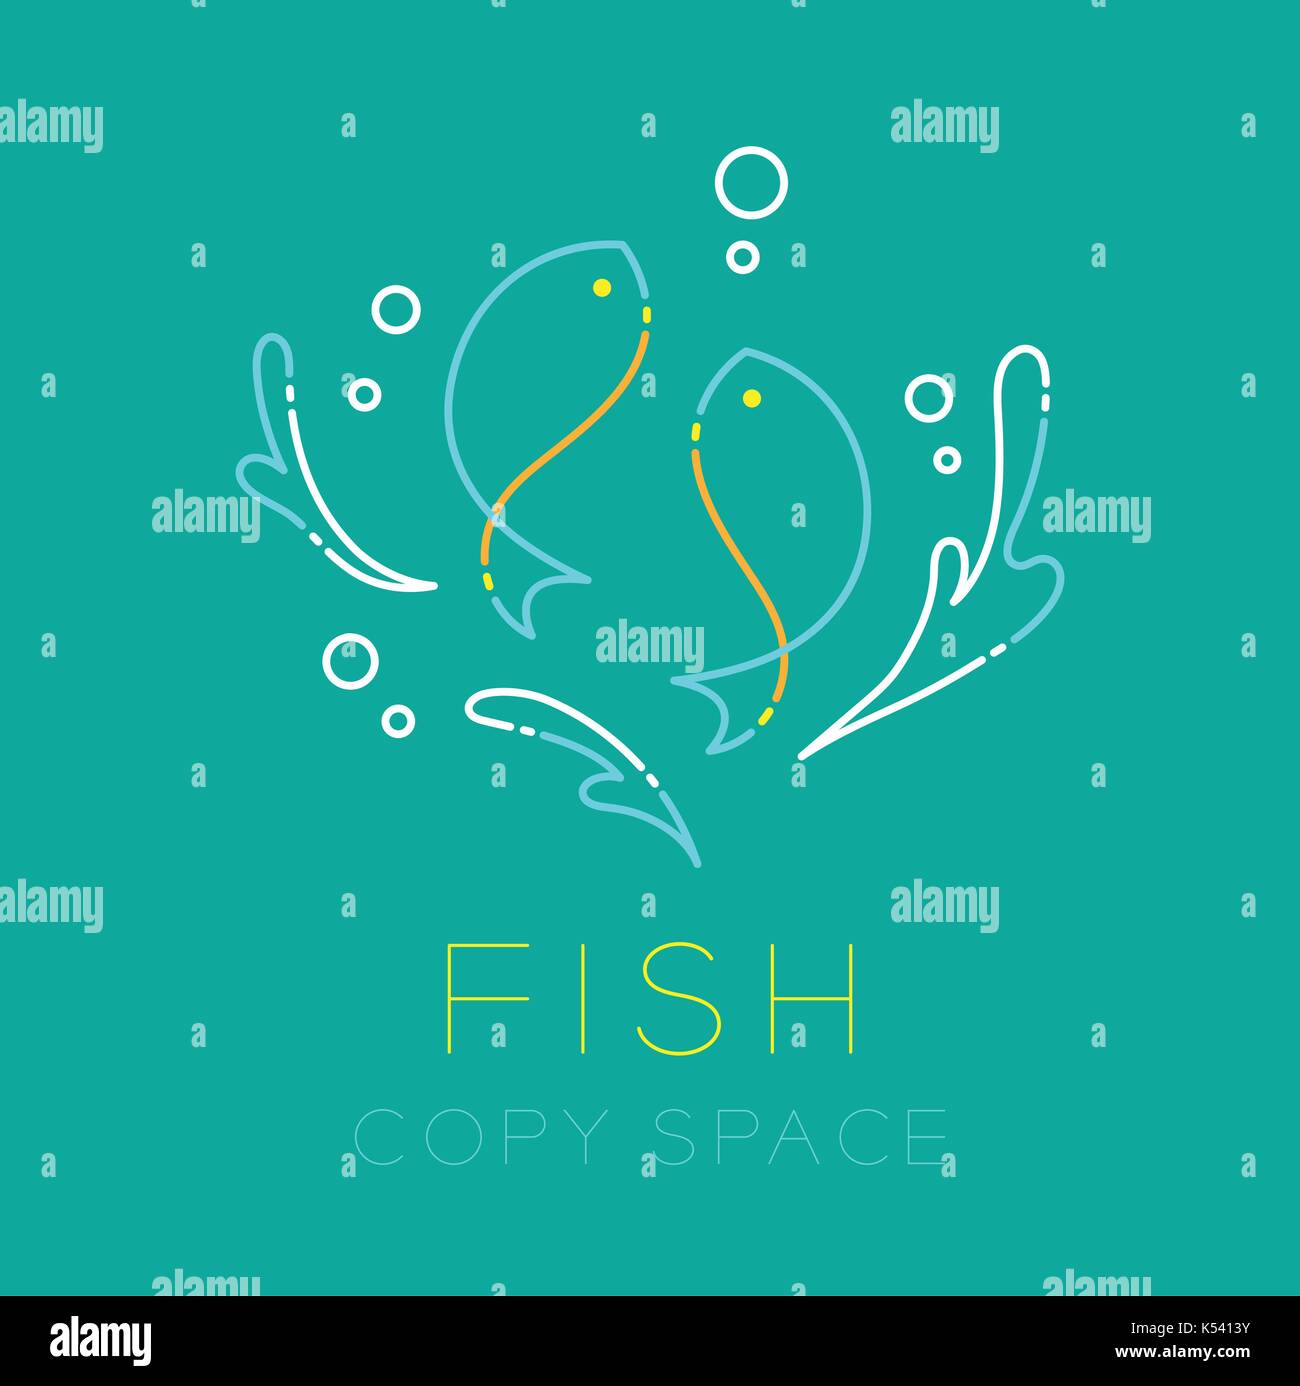 Two Fish or Pisces, Water splash and Air bubble logo icon outline stroke set dash line design illustration isolated on green turquoise background with Stock Vector